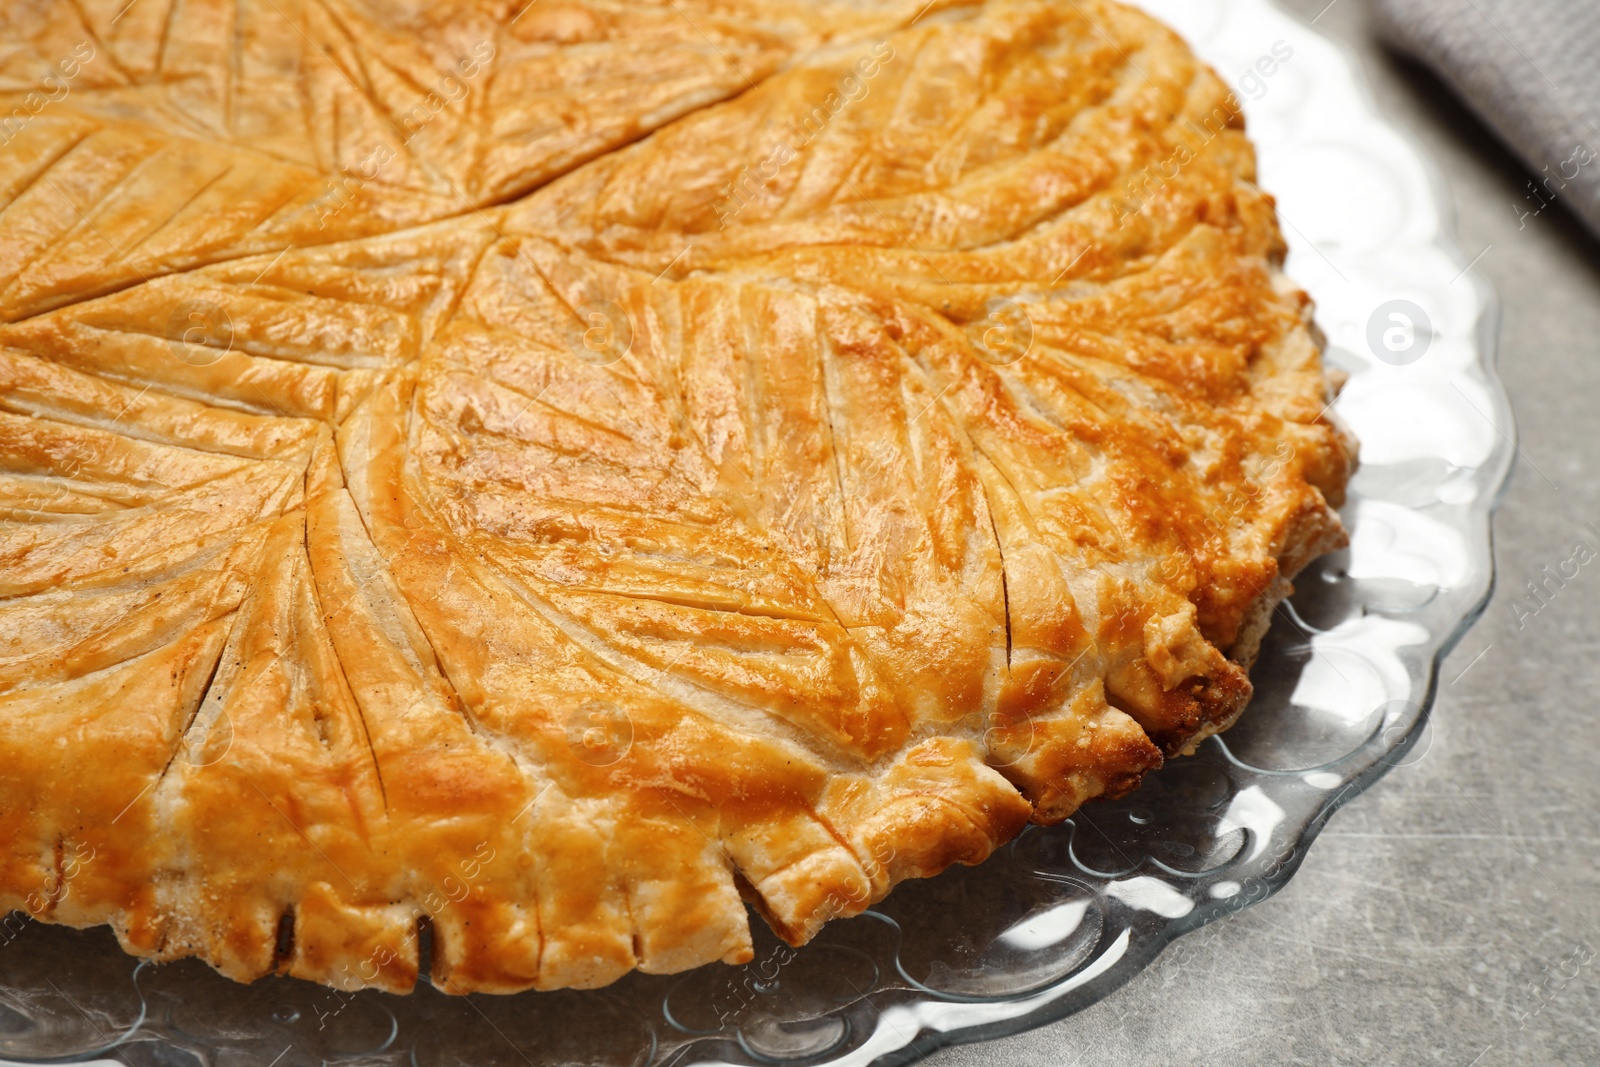 Photo of Traditional galette des rois on light grey table, closeup